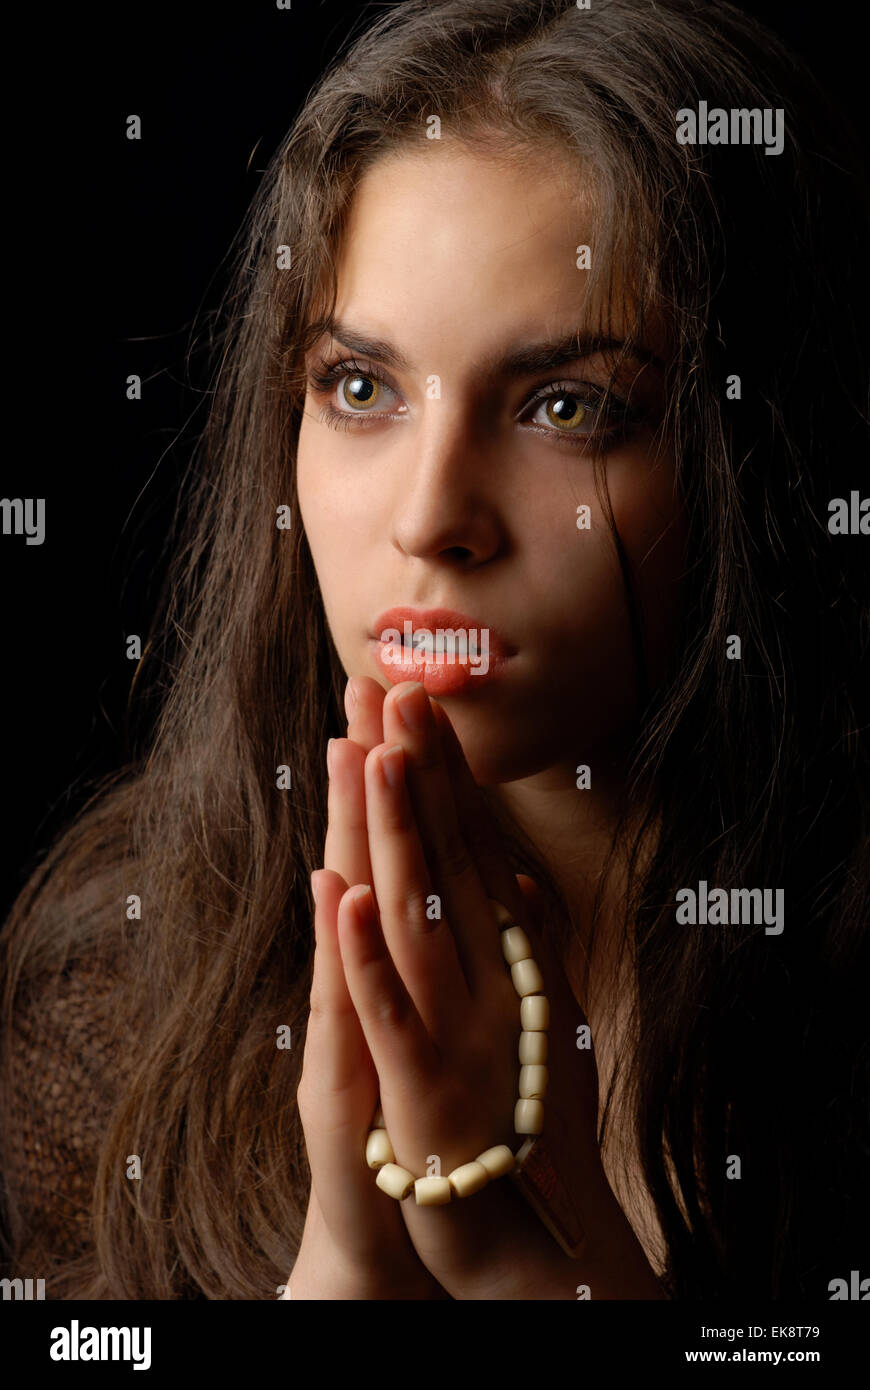 Praying of repentant woman Stock Photo